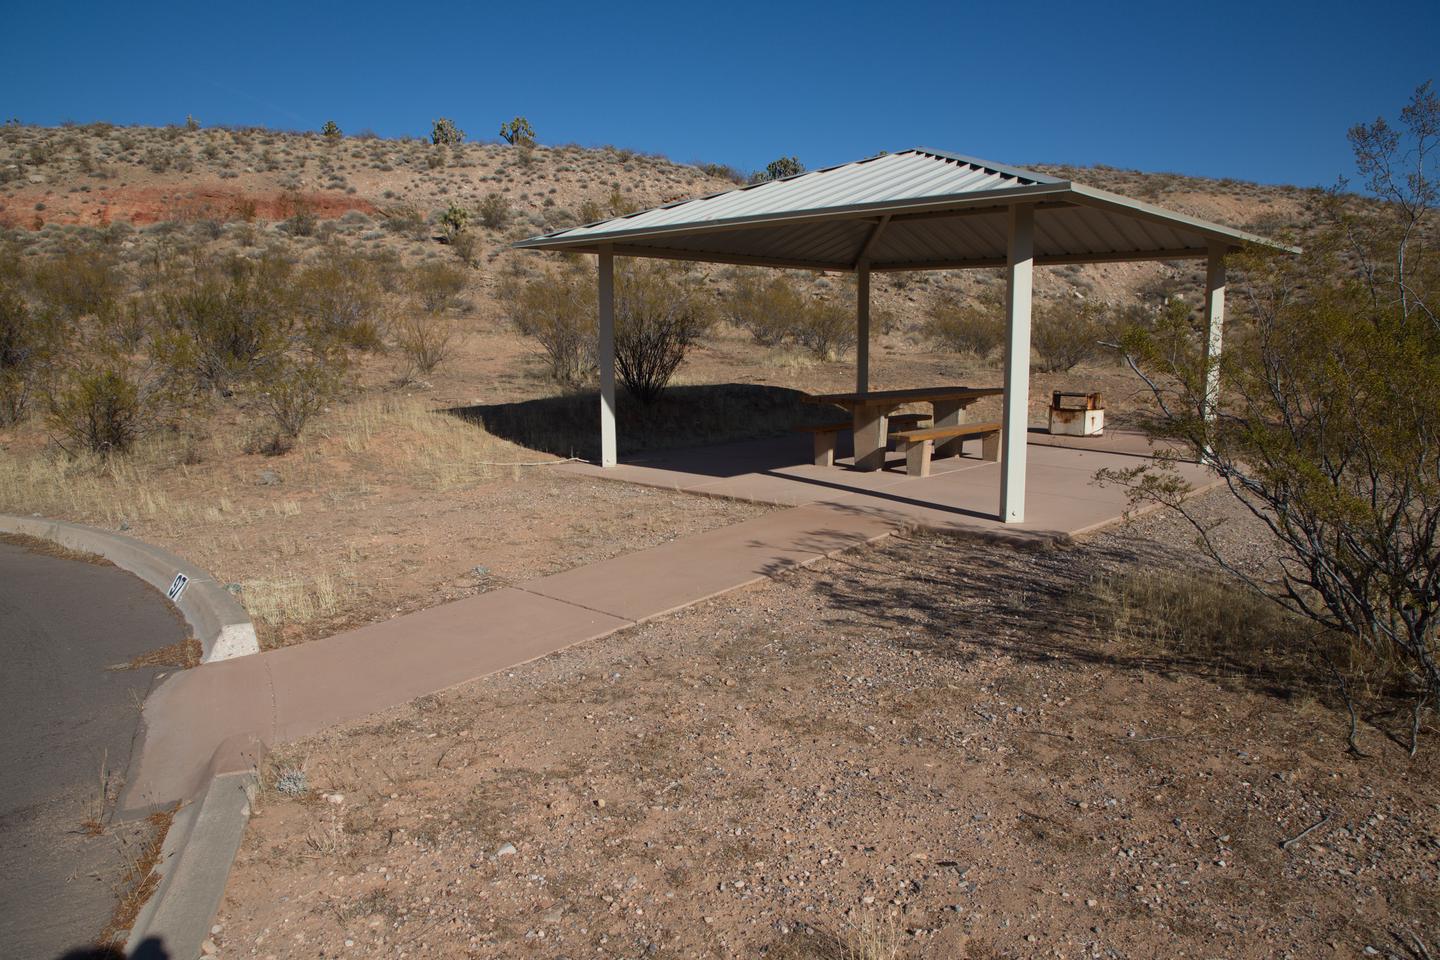 Site 97 WalkwaySite 97 has paved walkway, shelter, and fire pit